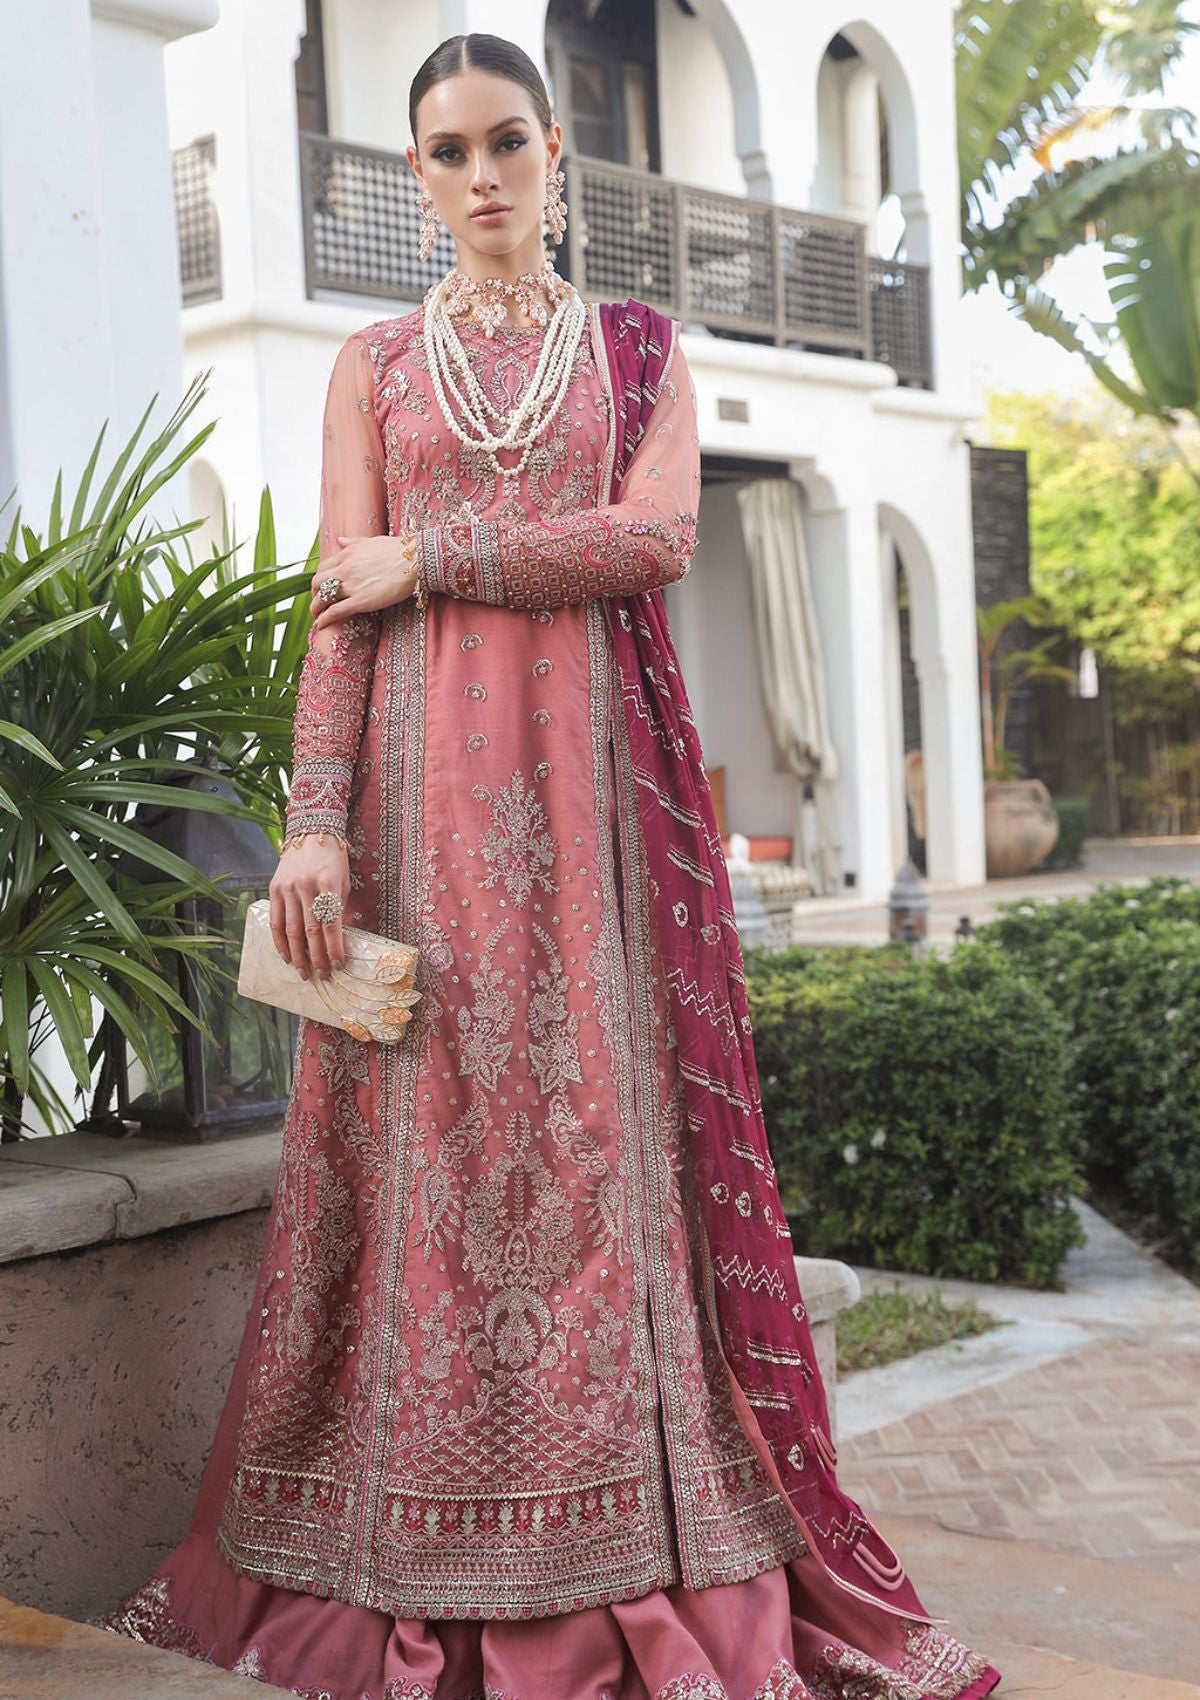 Formal Collection - Alif - Luxury Chiffon - PINK OASIS